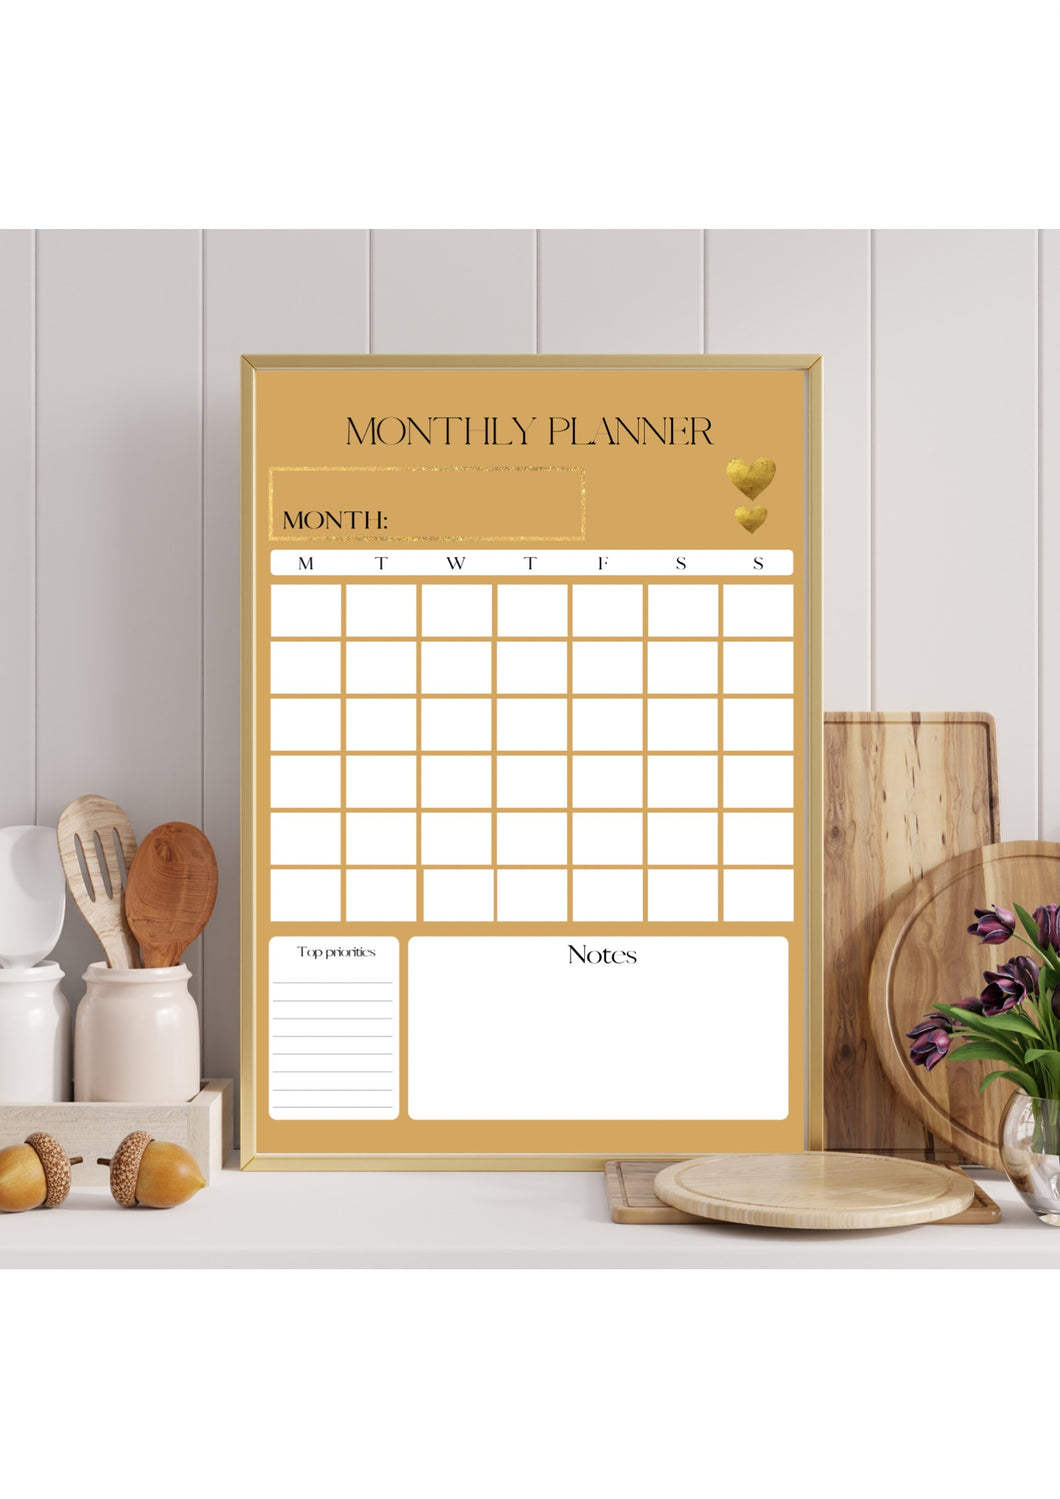 Printable monthly planner A2 poster for wall | 4 colors